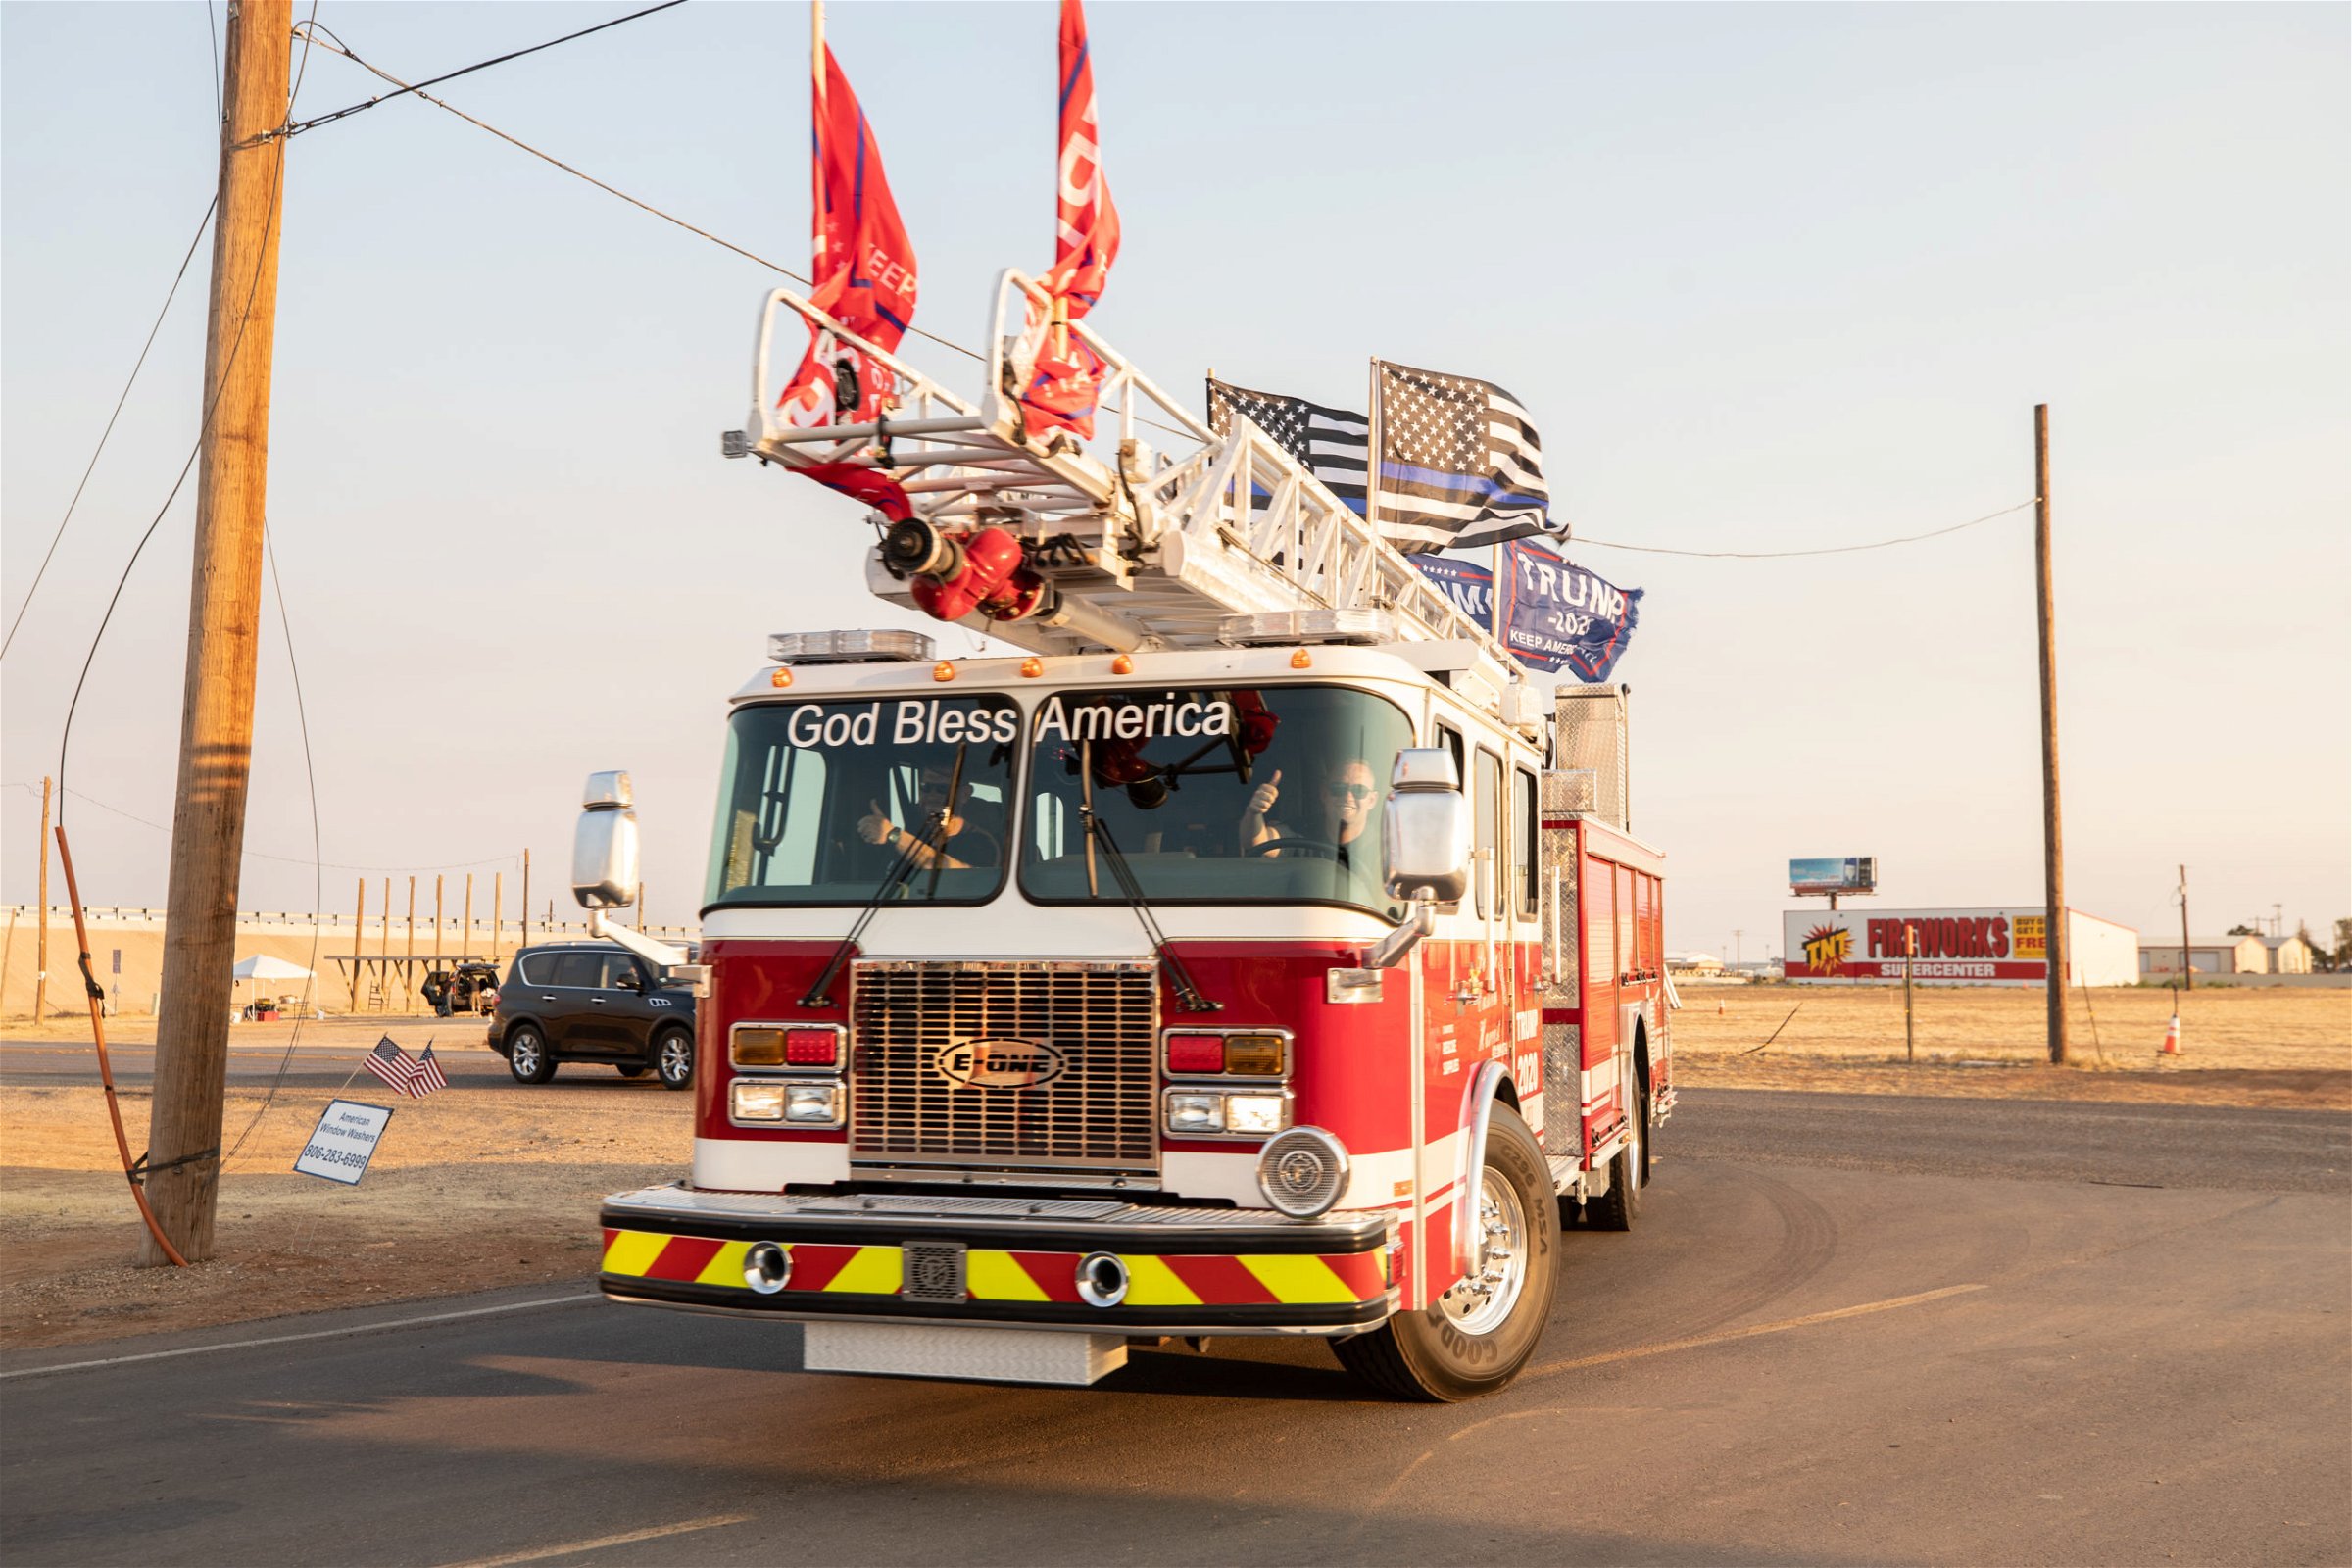 A fire truck returns to Cook's Garage from a "Trump Train" car parade in Lubbock, Texas, on Sunday, Oct. 18, 2020. (Kaylee Greenlee - DCNF)